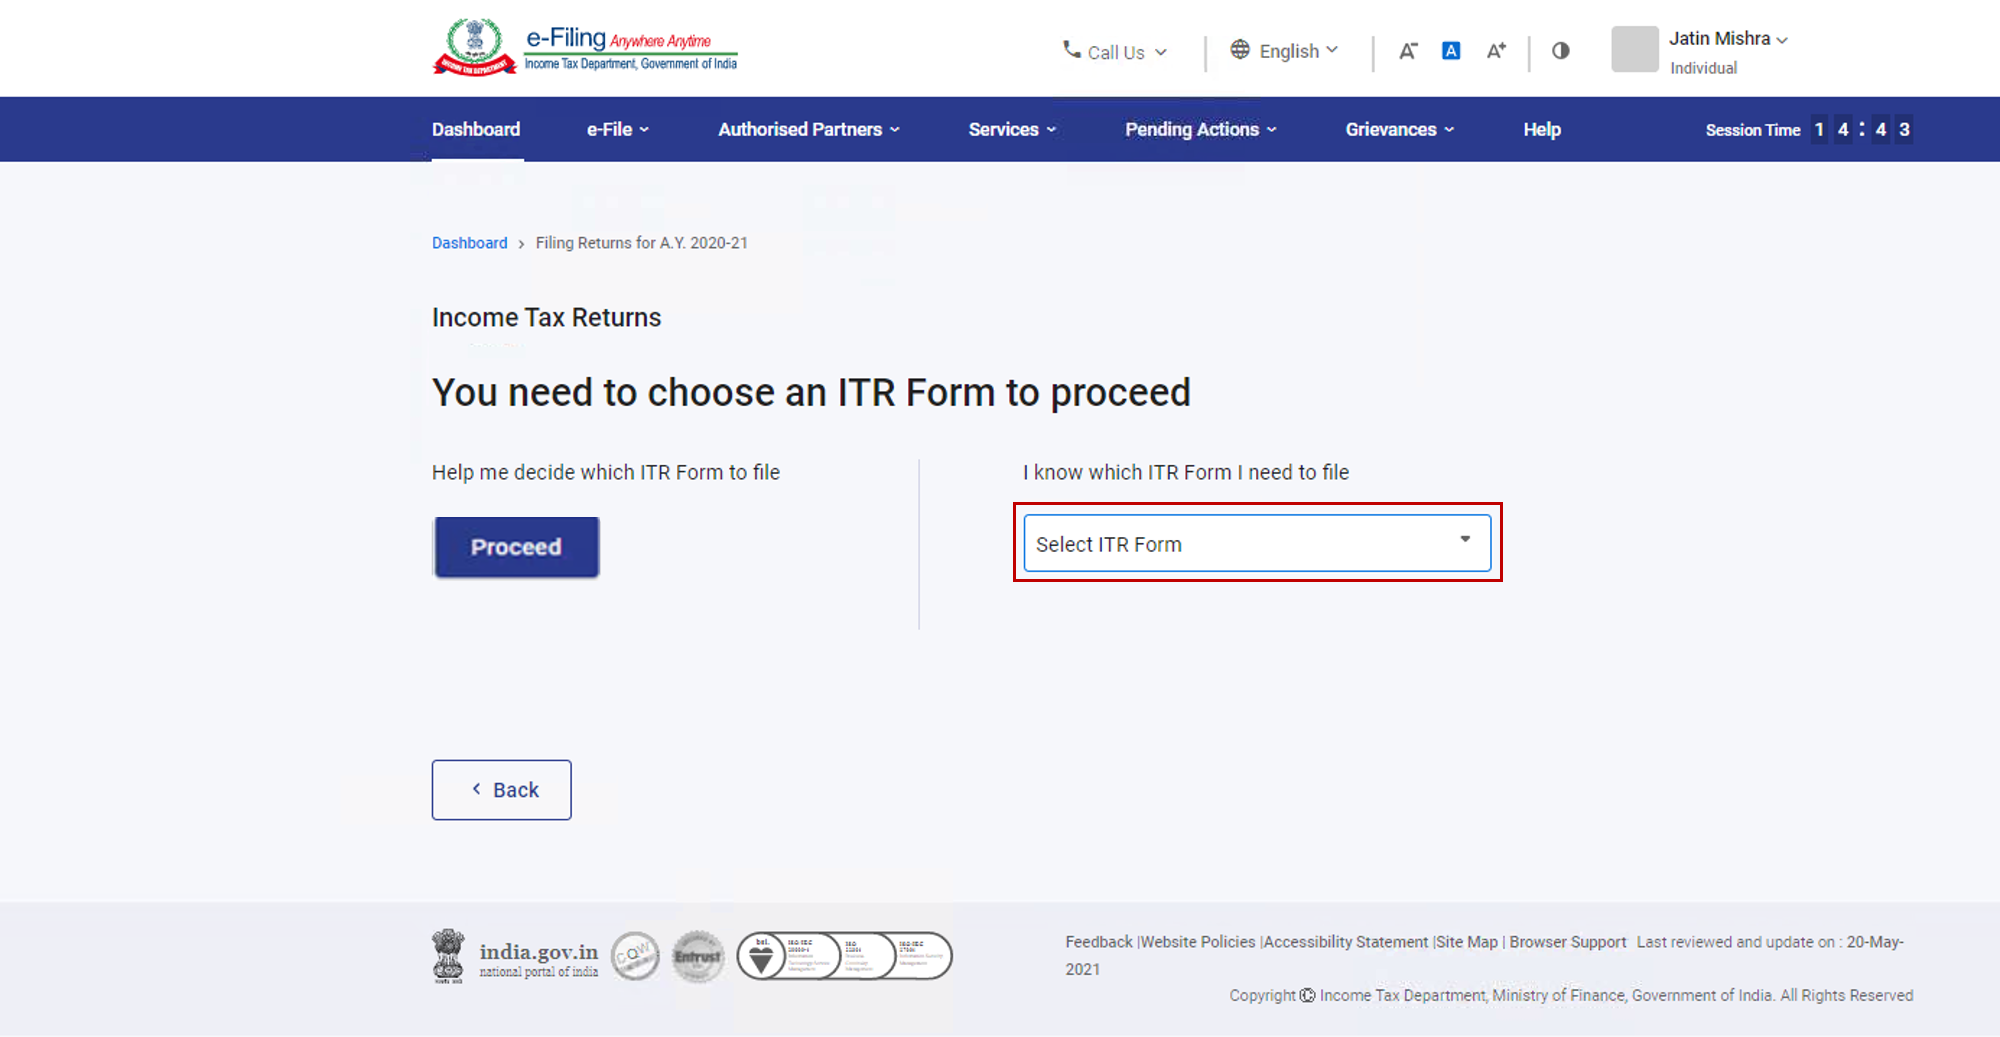 How to file Income Tax Return 2021-22 in the New Income Tax Portal?